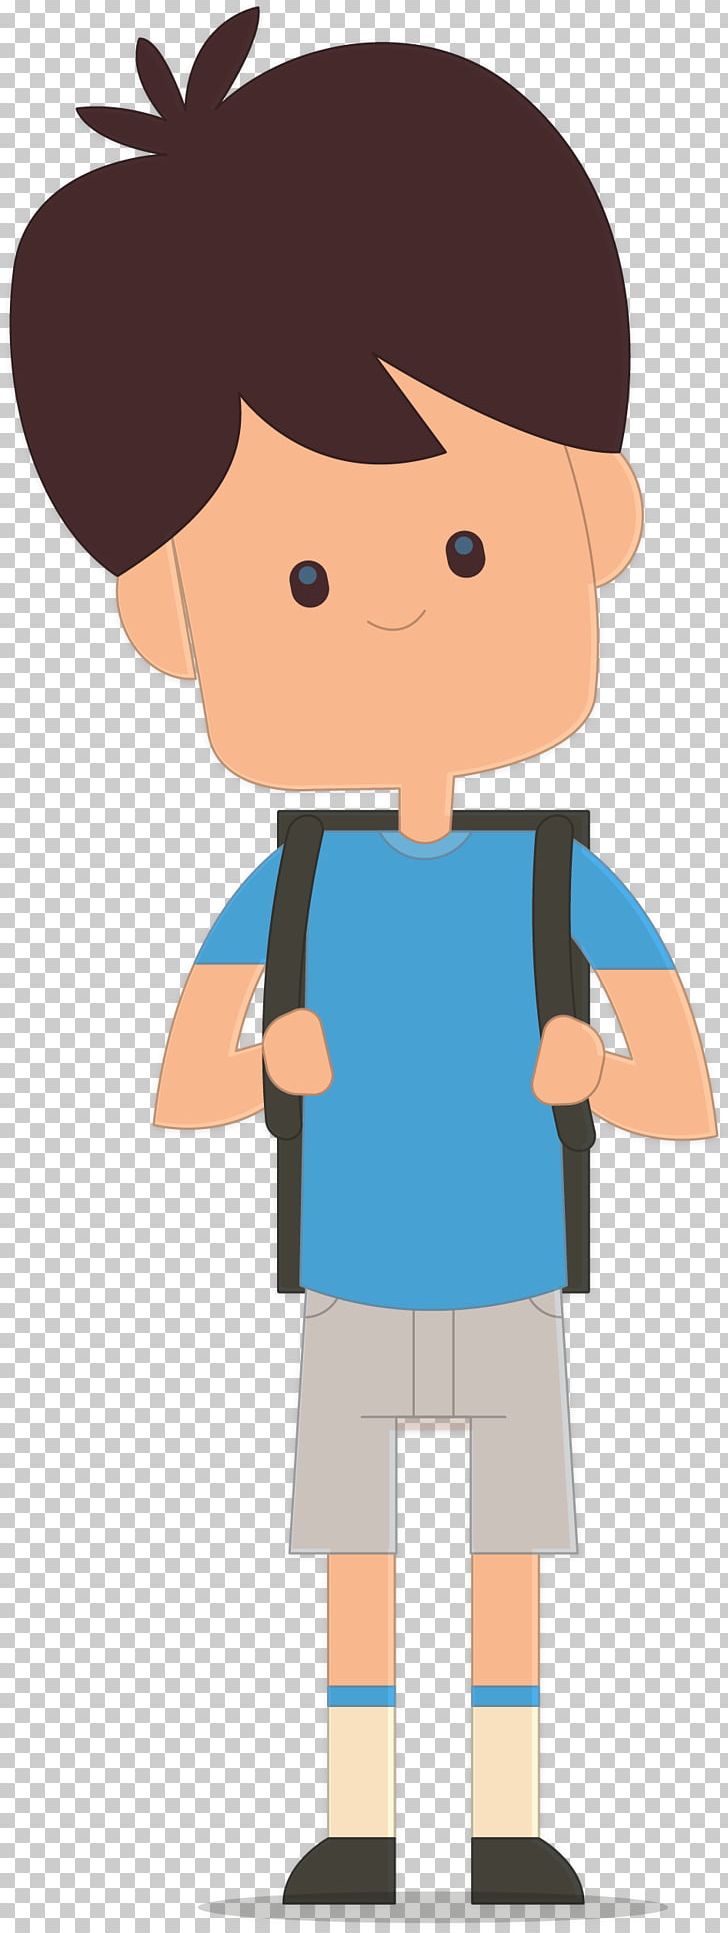 Student Cartoon PNG, Clipart, Boy, Carry Schoolbag, Cartoon Characters, Cartoon Student, Child Free PNG Download